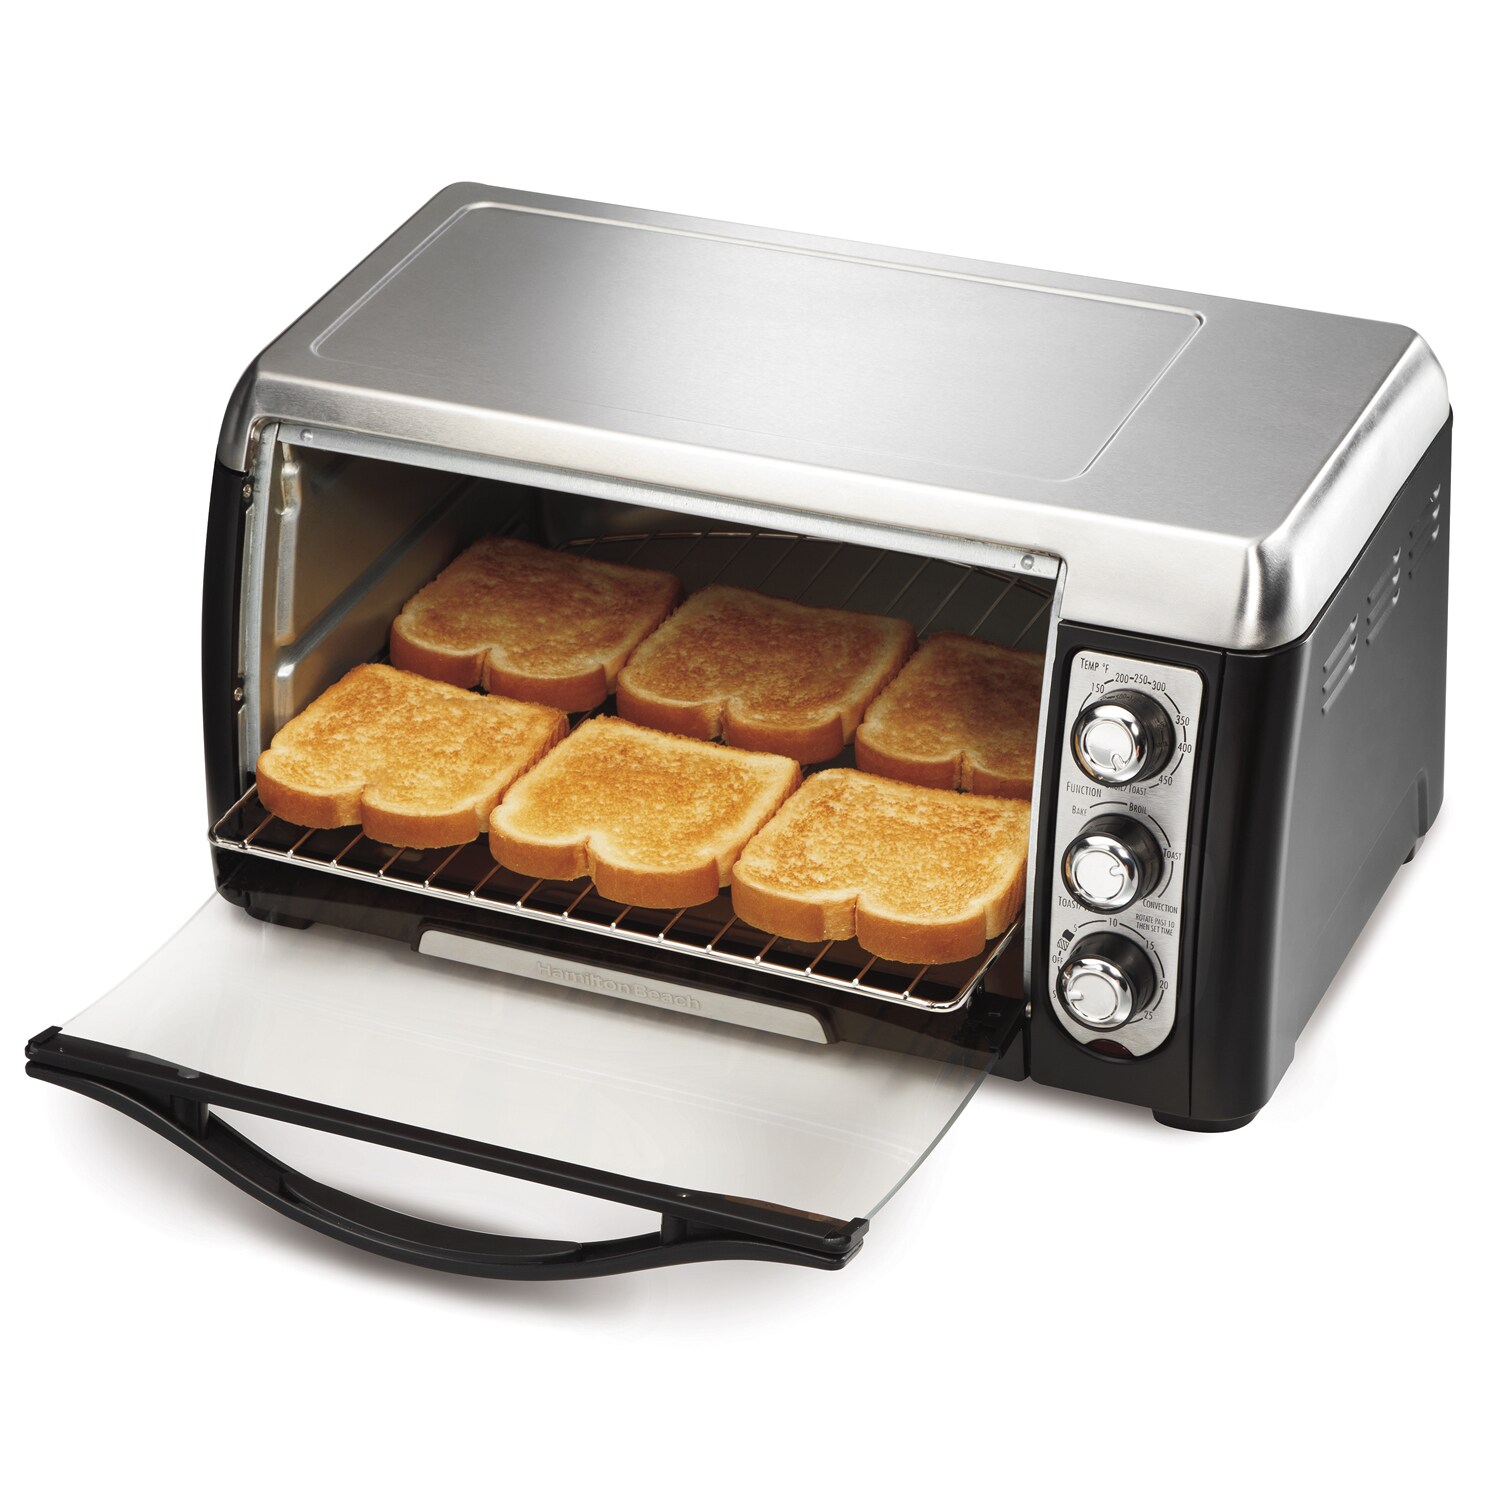 https://ak1.ostkcdn.com/images/products/8670466/Hamilton-Beach-31331-Stainless-Steel-Convection-Toaster-Oven-2fc5c5fa-8c0a-4658-92d9-29c42ba4c19b.jpg